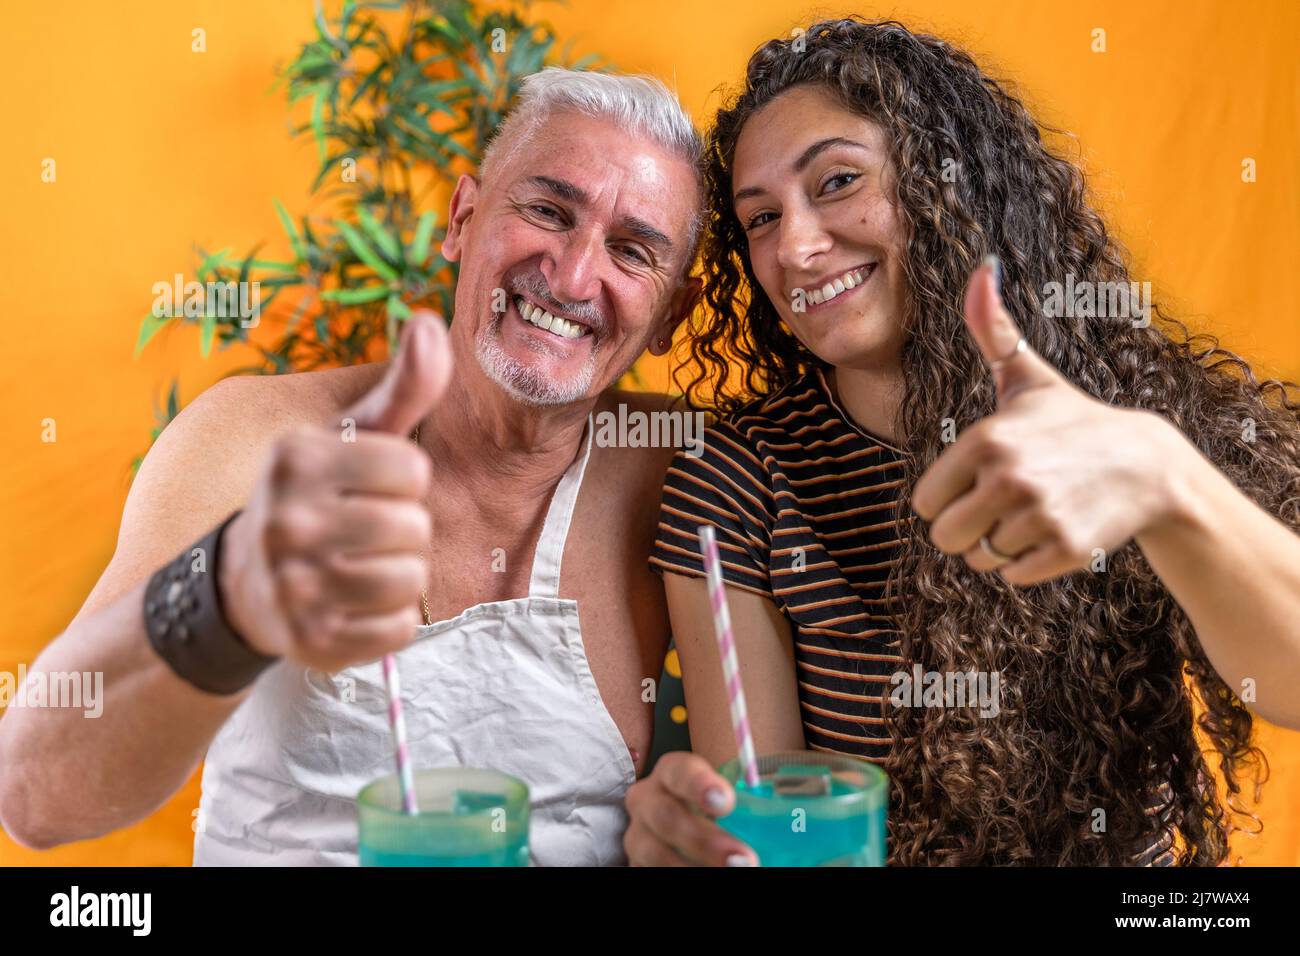 father and daughter drinking a blue cocktail doing the thumb up sign with their hands - studio shot on yellow background Stock Photo